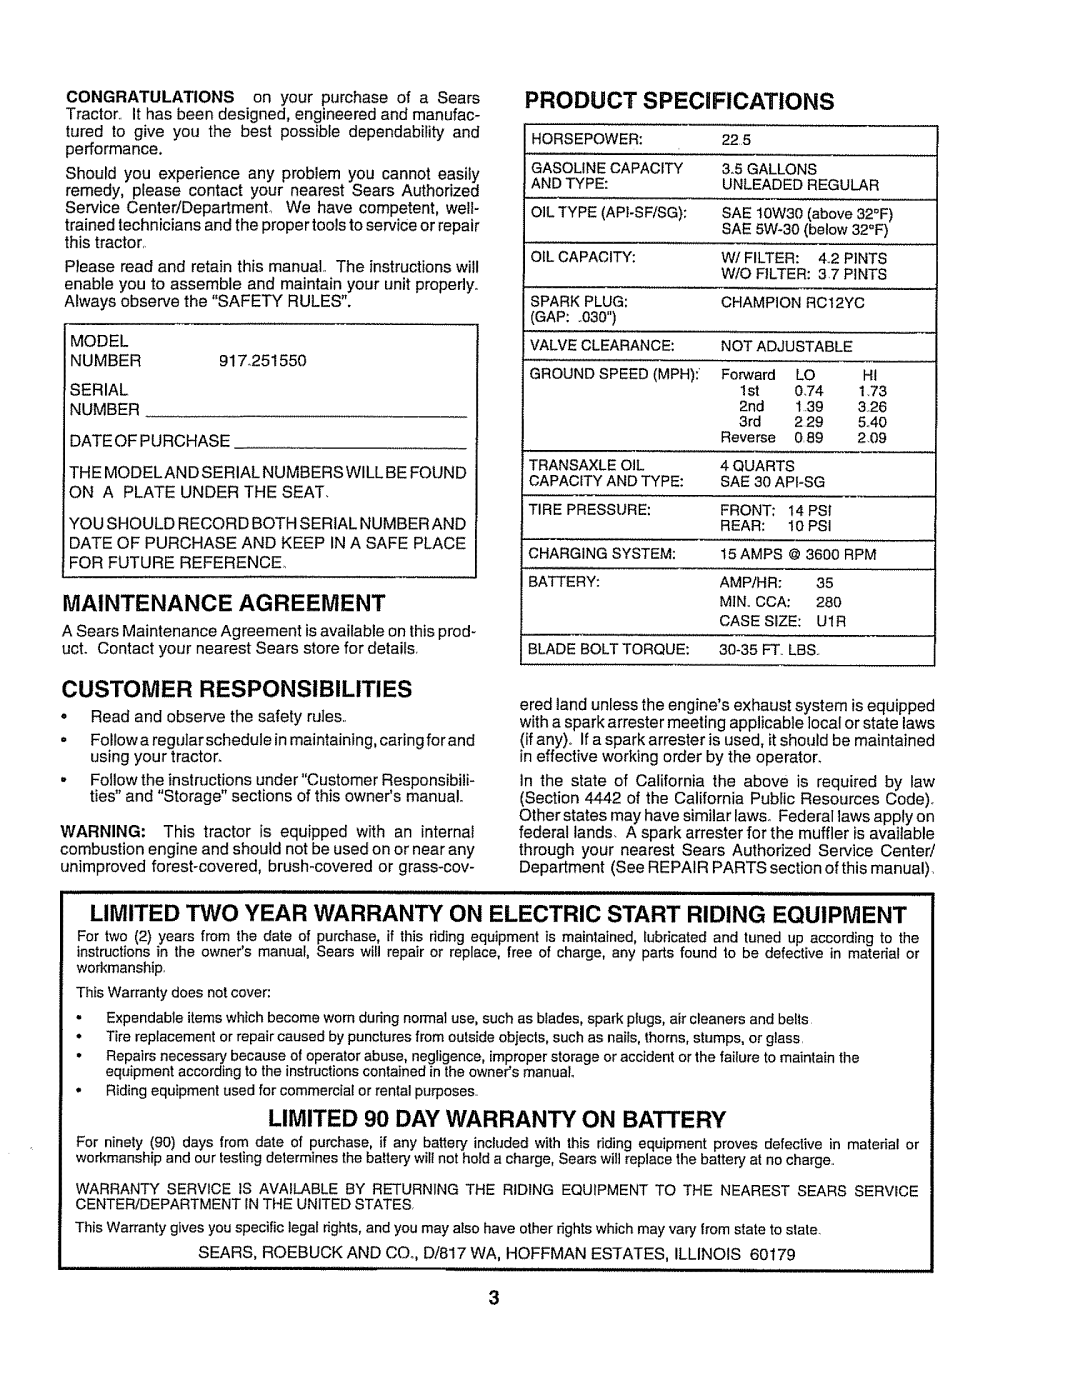 Craftsman 917O251550 owner manual Customer Responsibilities, Maintenance Agreement, Product Specifications 